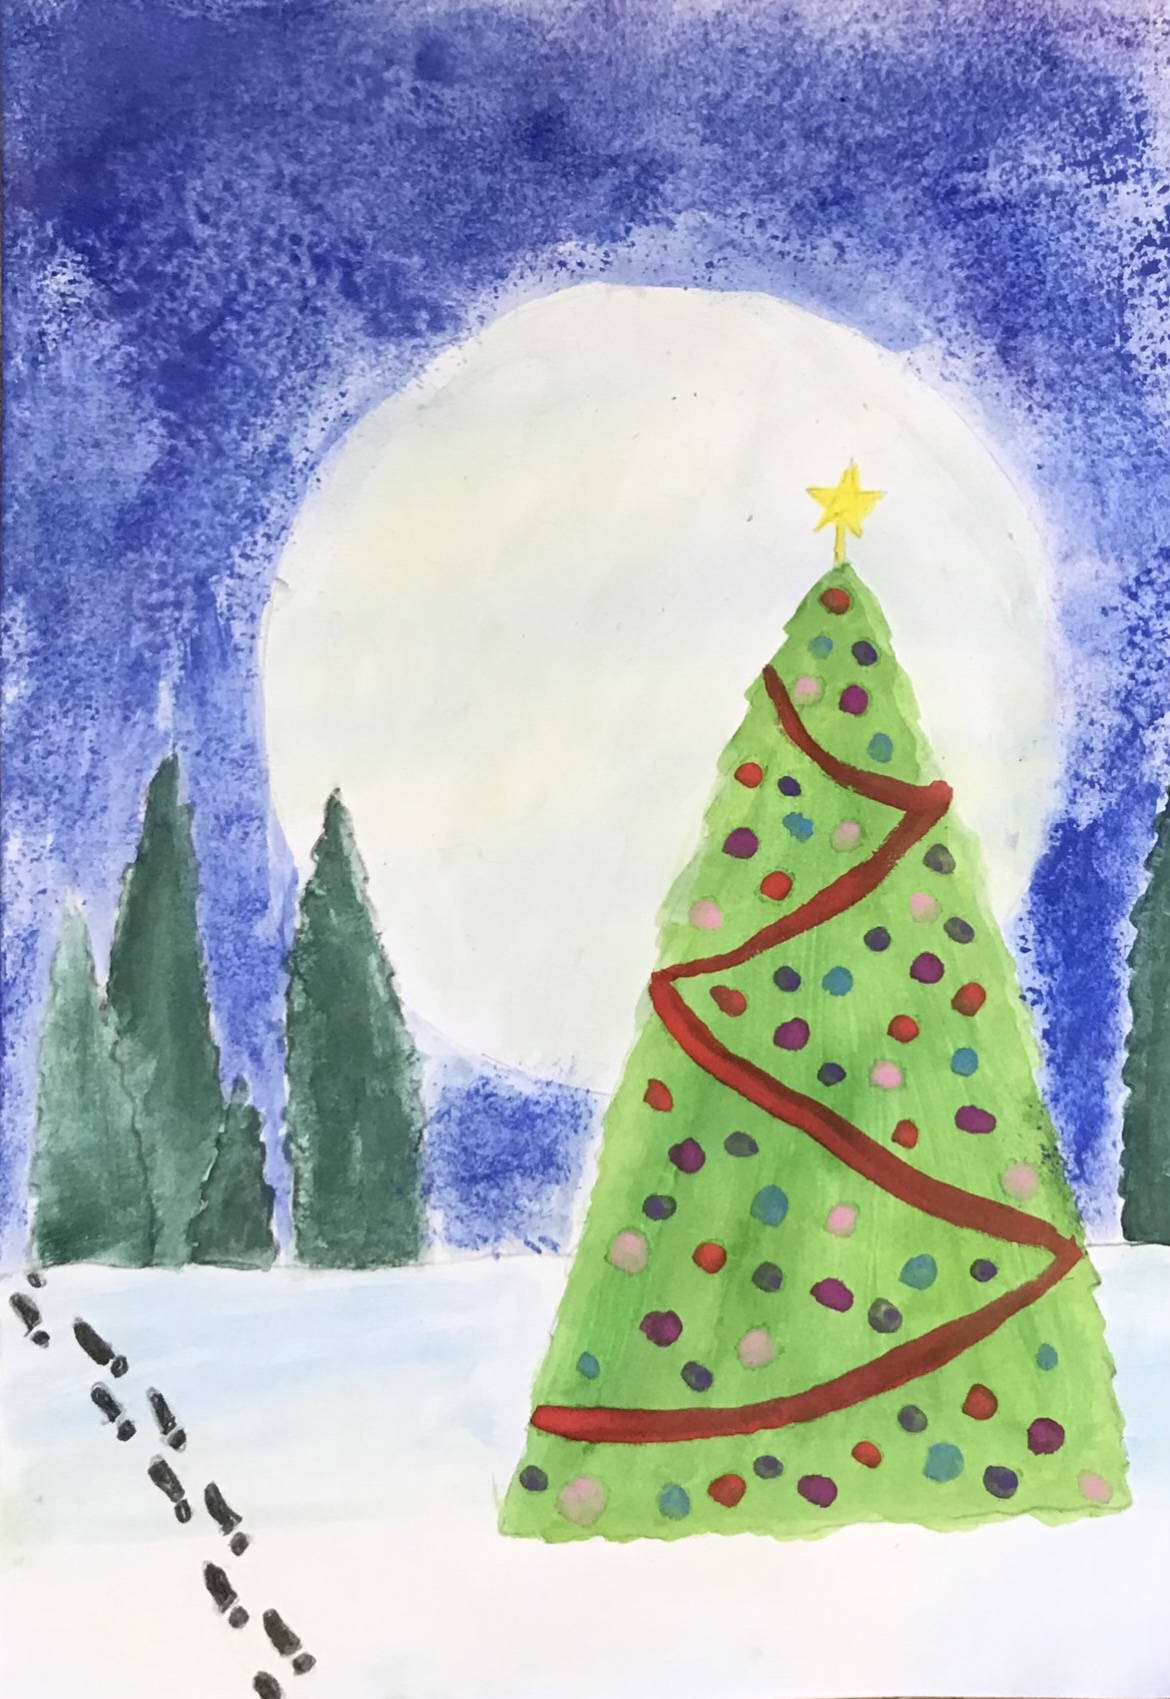 James Langland's Christmas card entry. It features a Christmas tree in front of a large full moon.